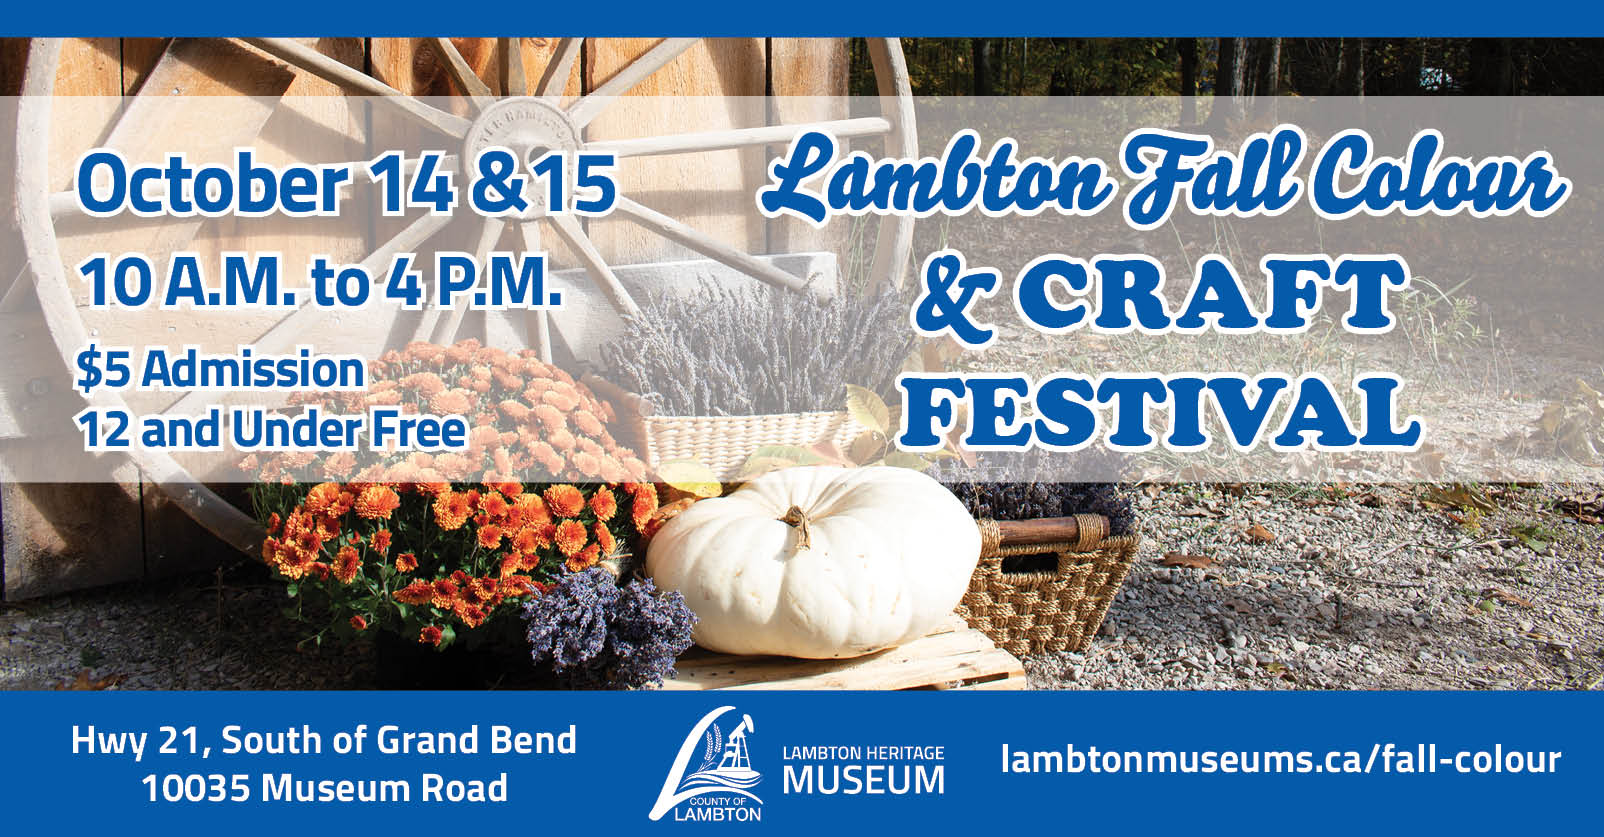 Fall Colour and Craft Festival dates and location over photo of fall mums, pumpkins and wagon wheel